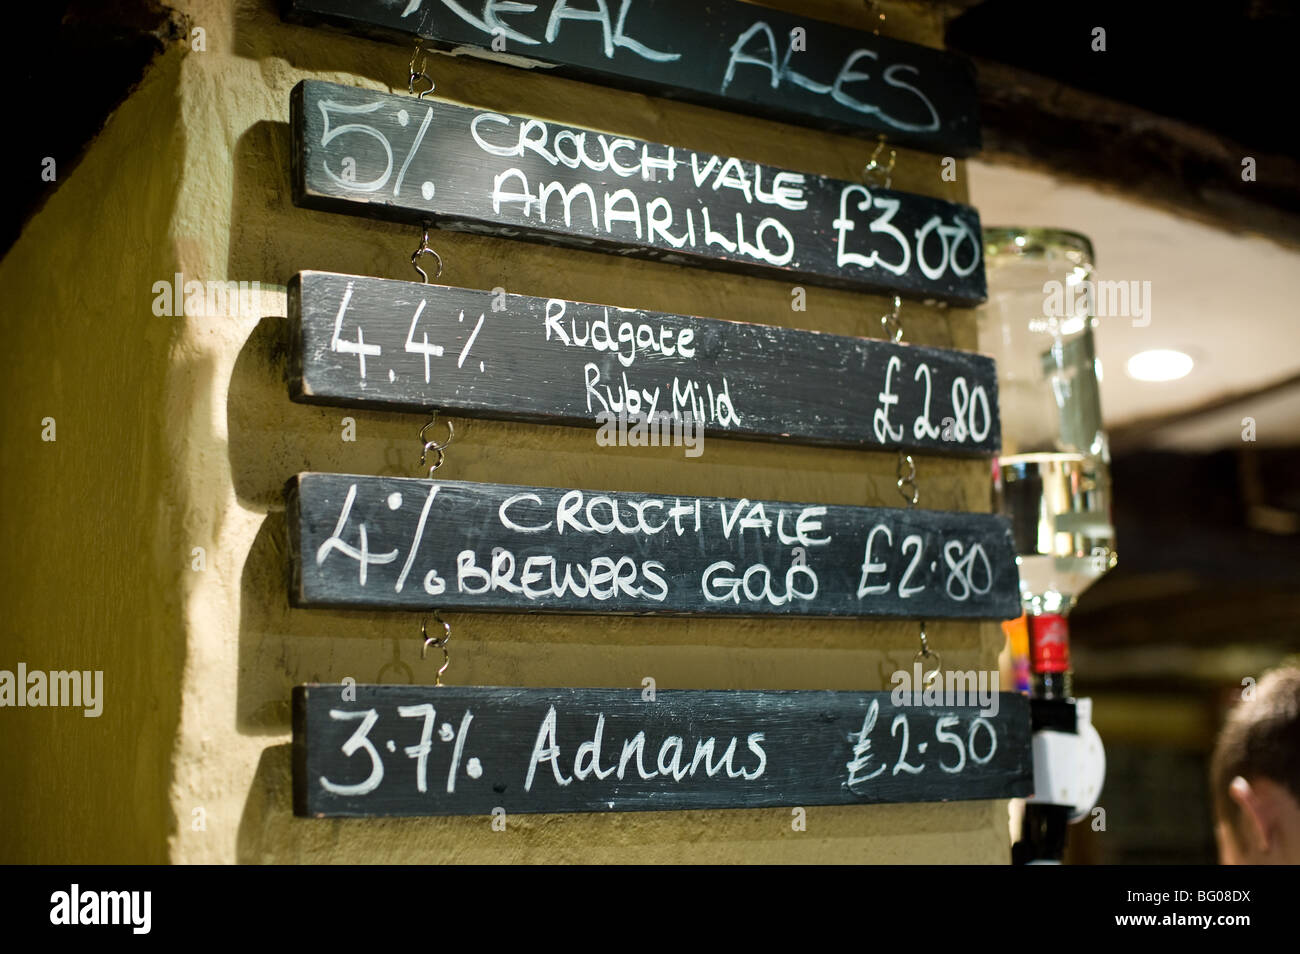 A list of real ale for sale in a public house in Essex.  Photo by Gordon Scammell Stock Photo